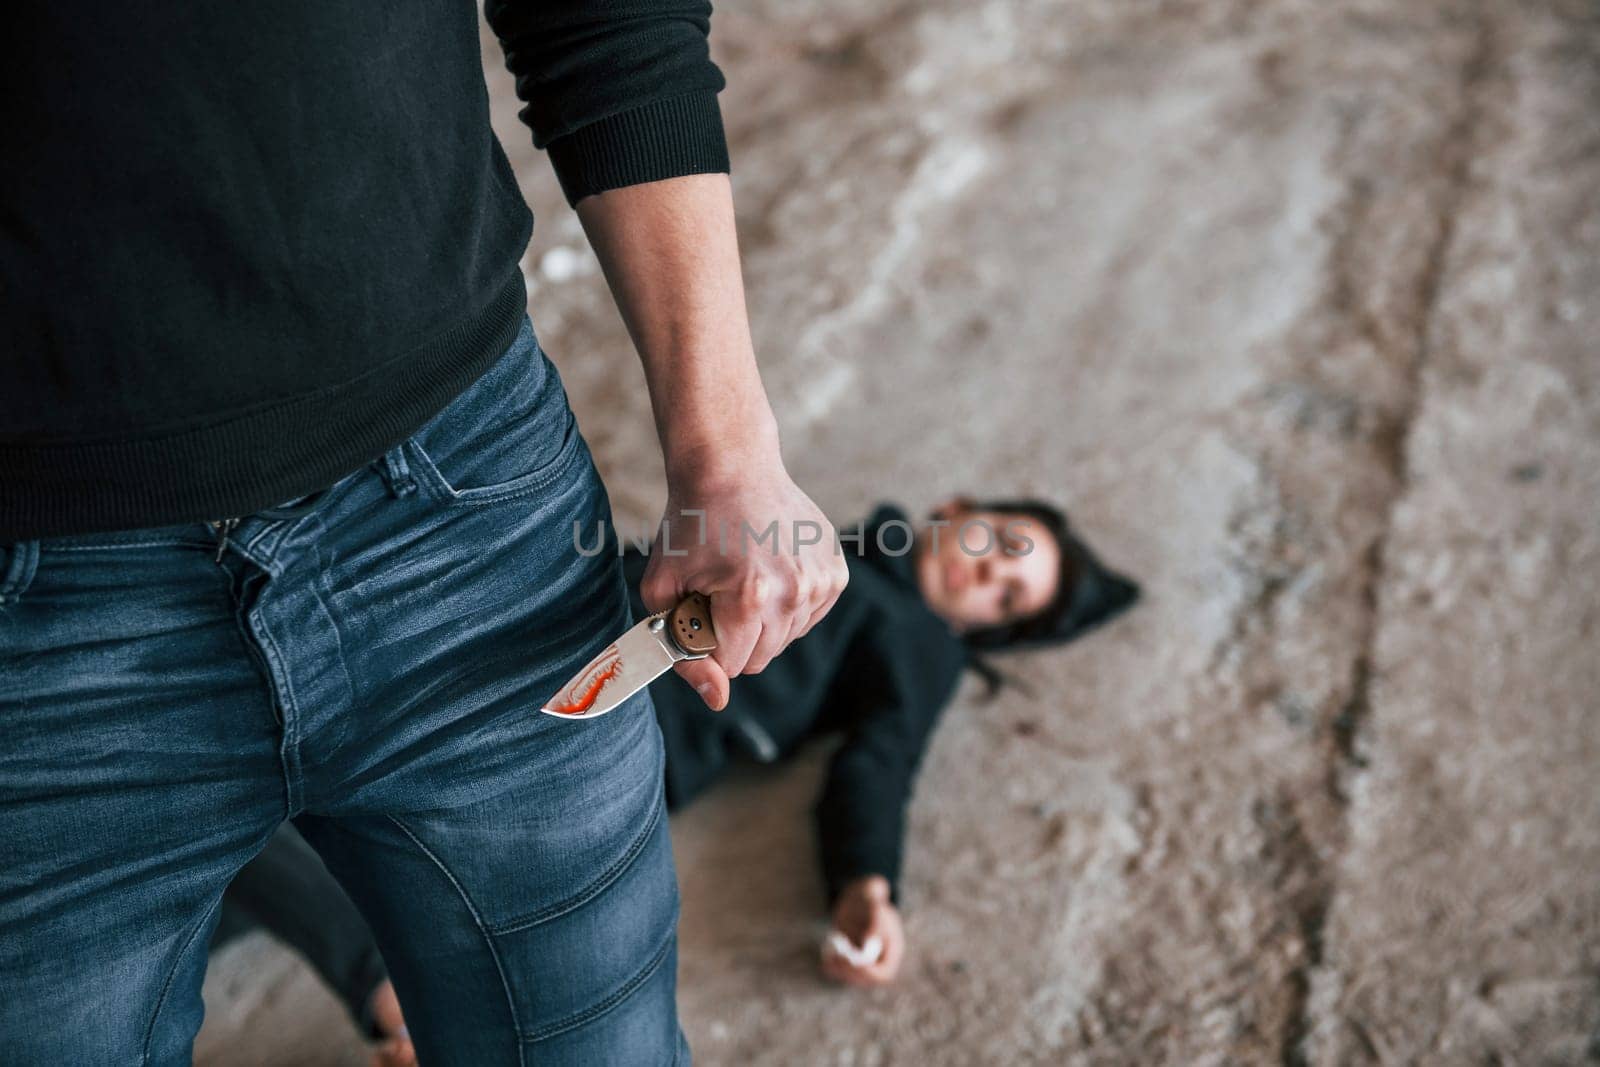 Murderer with knife covered in blood standing near his dead female young victim.